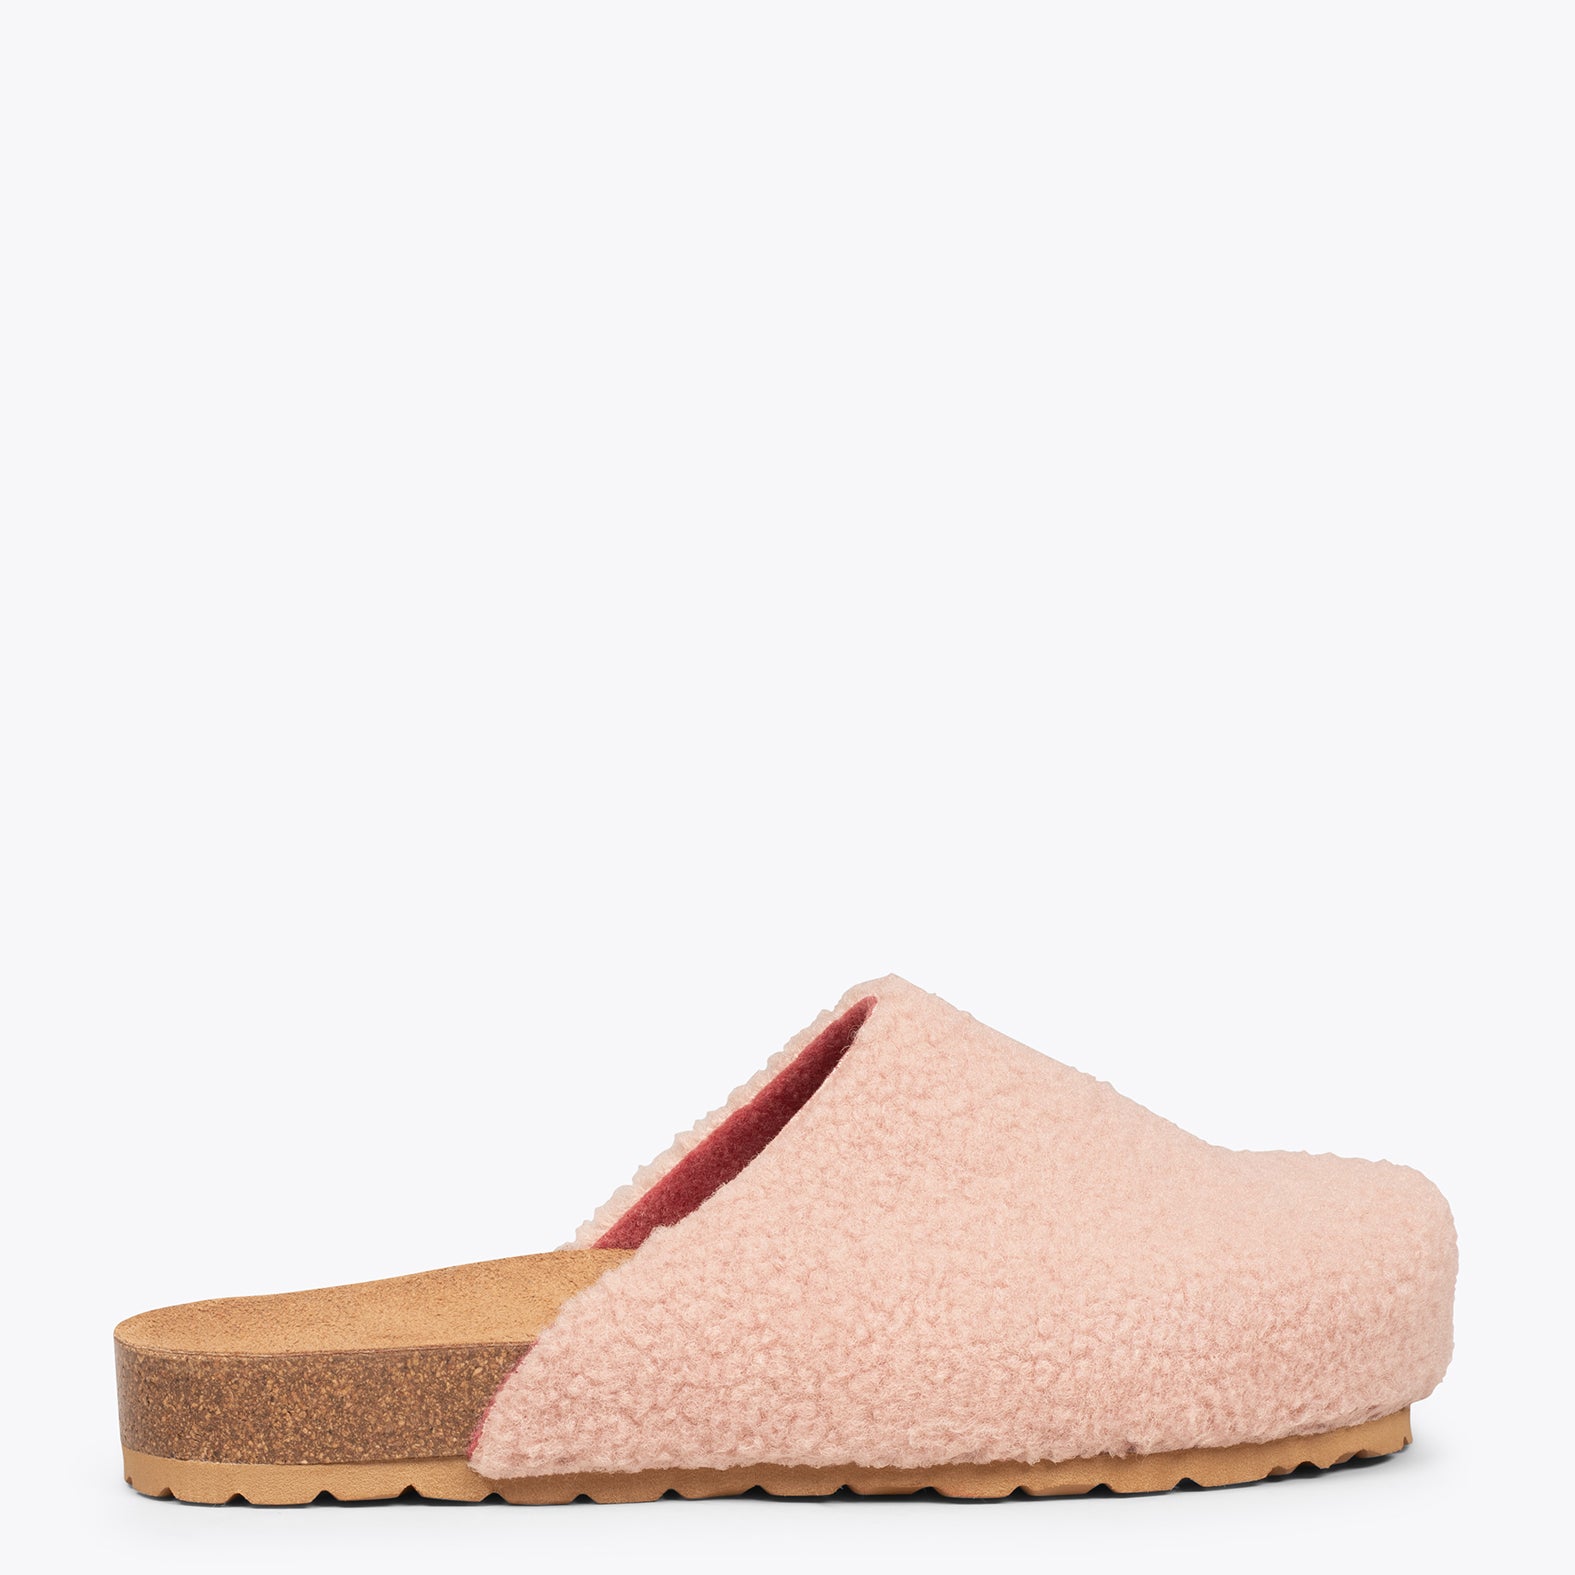 DREAMING - Chaussons fourrure mouton ROSE